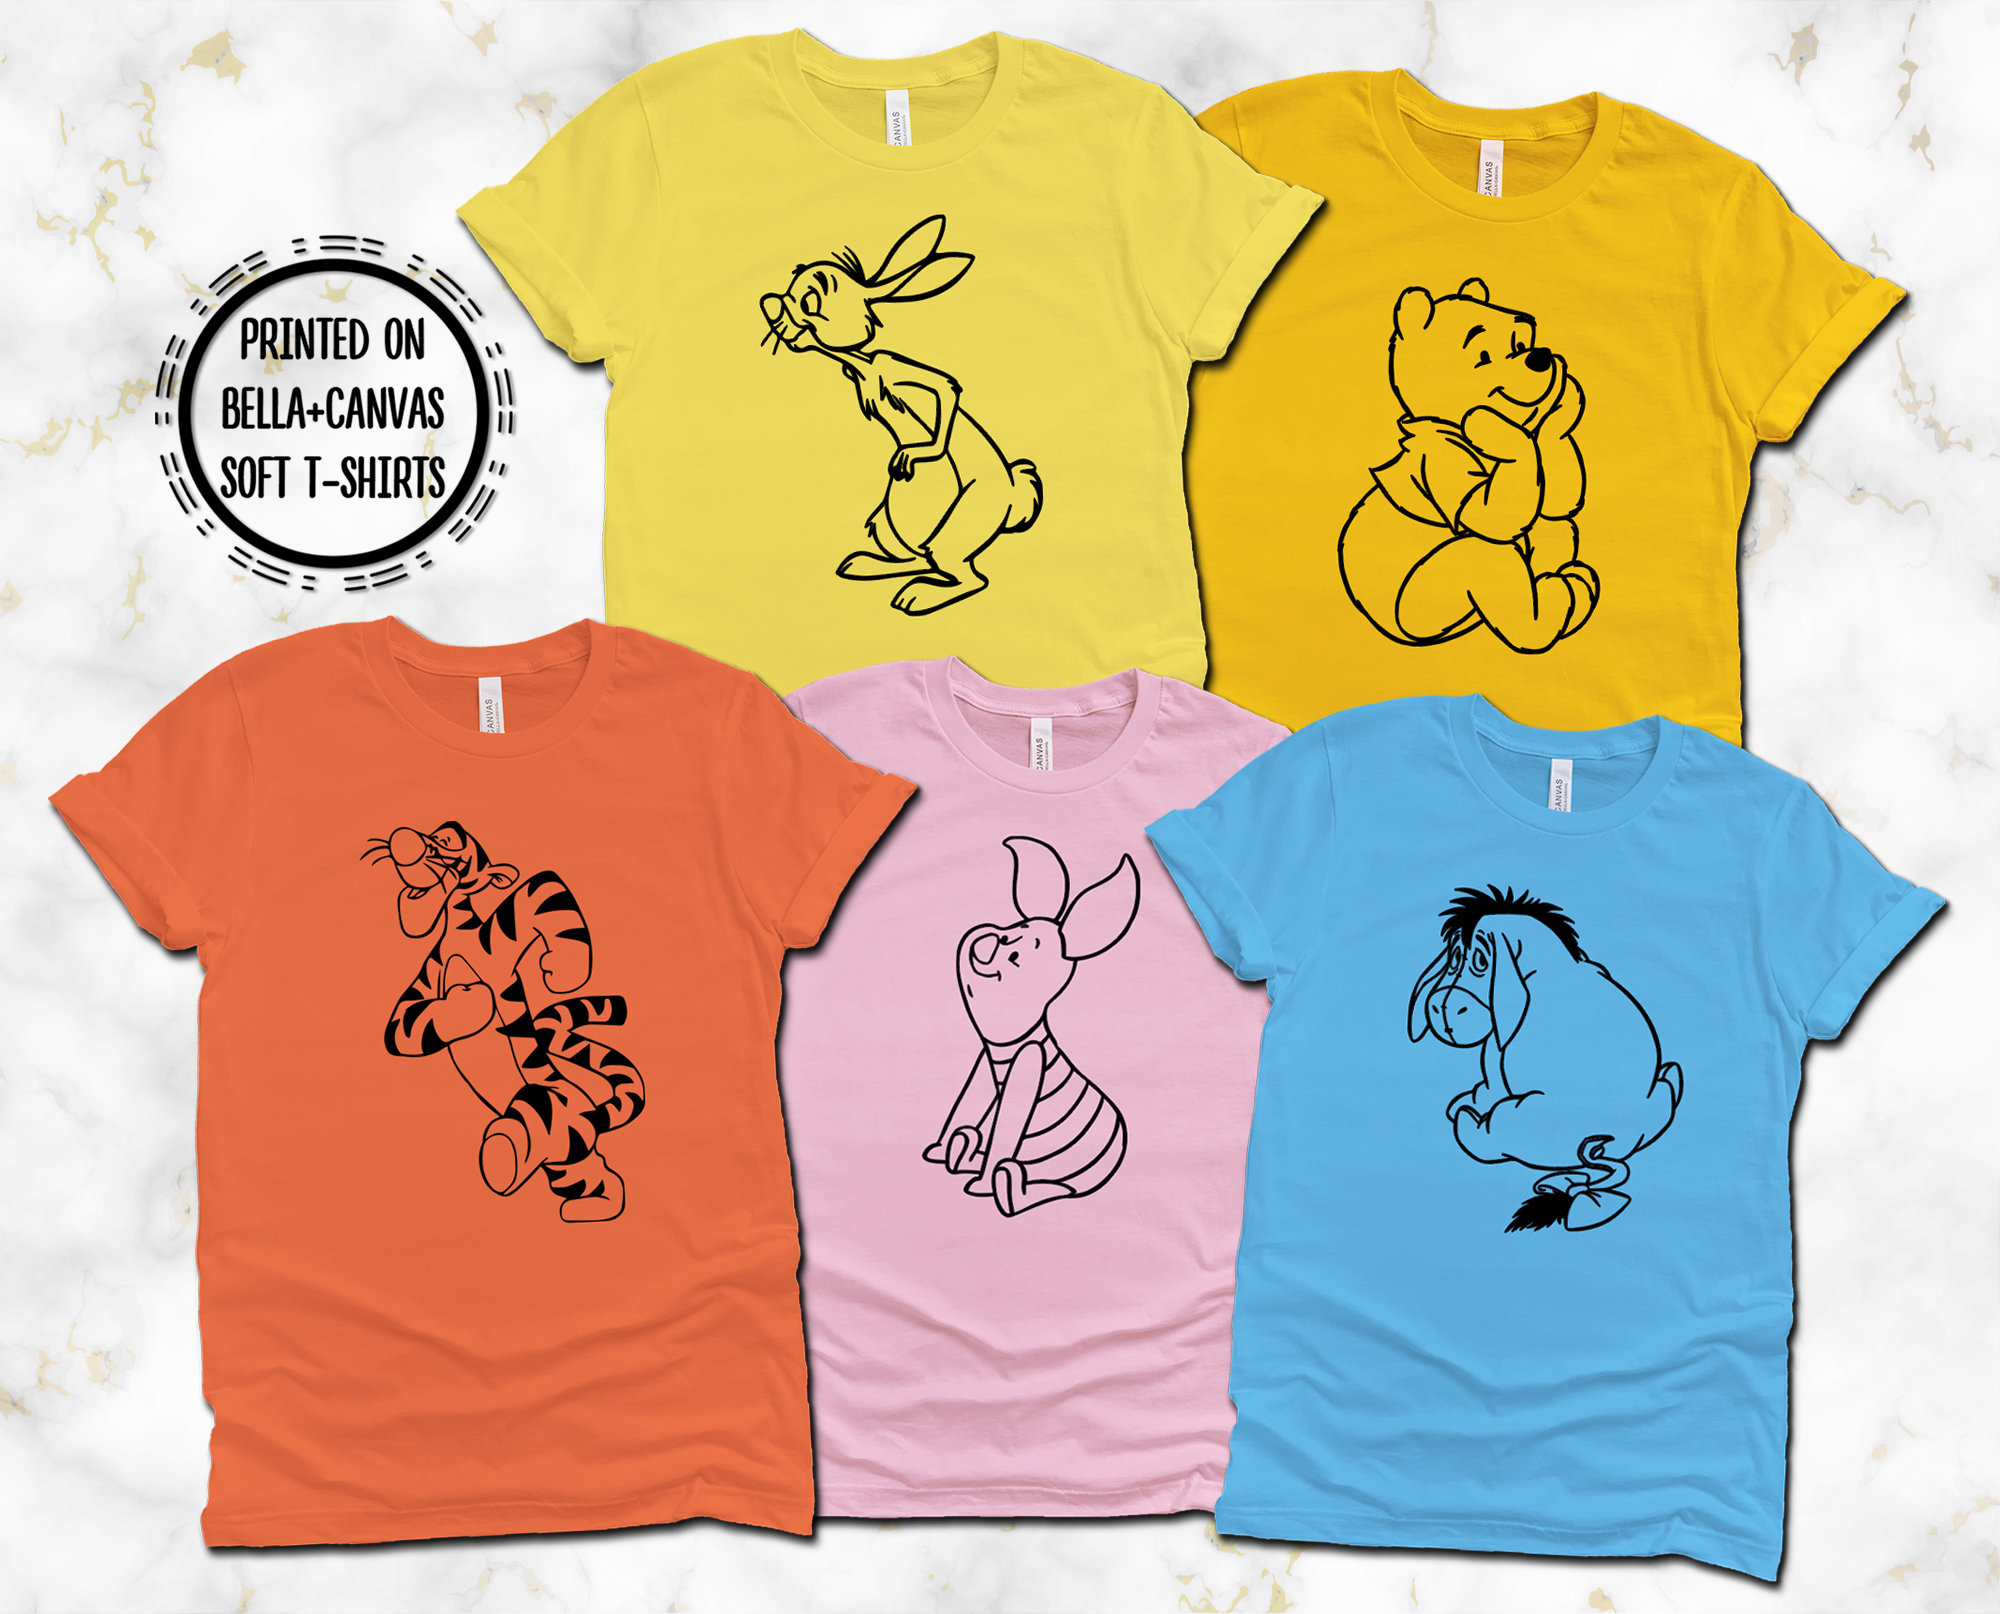 Tigger, Outline Pooh, Pooh Eeyore T-shirts, Canvas T-shirts Winnie on Bella and the Etsy Printed Friends Rabbit, Print - T-shirts, Piglet, Winnie